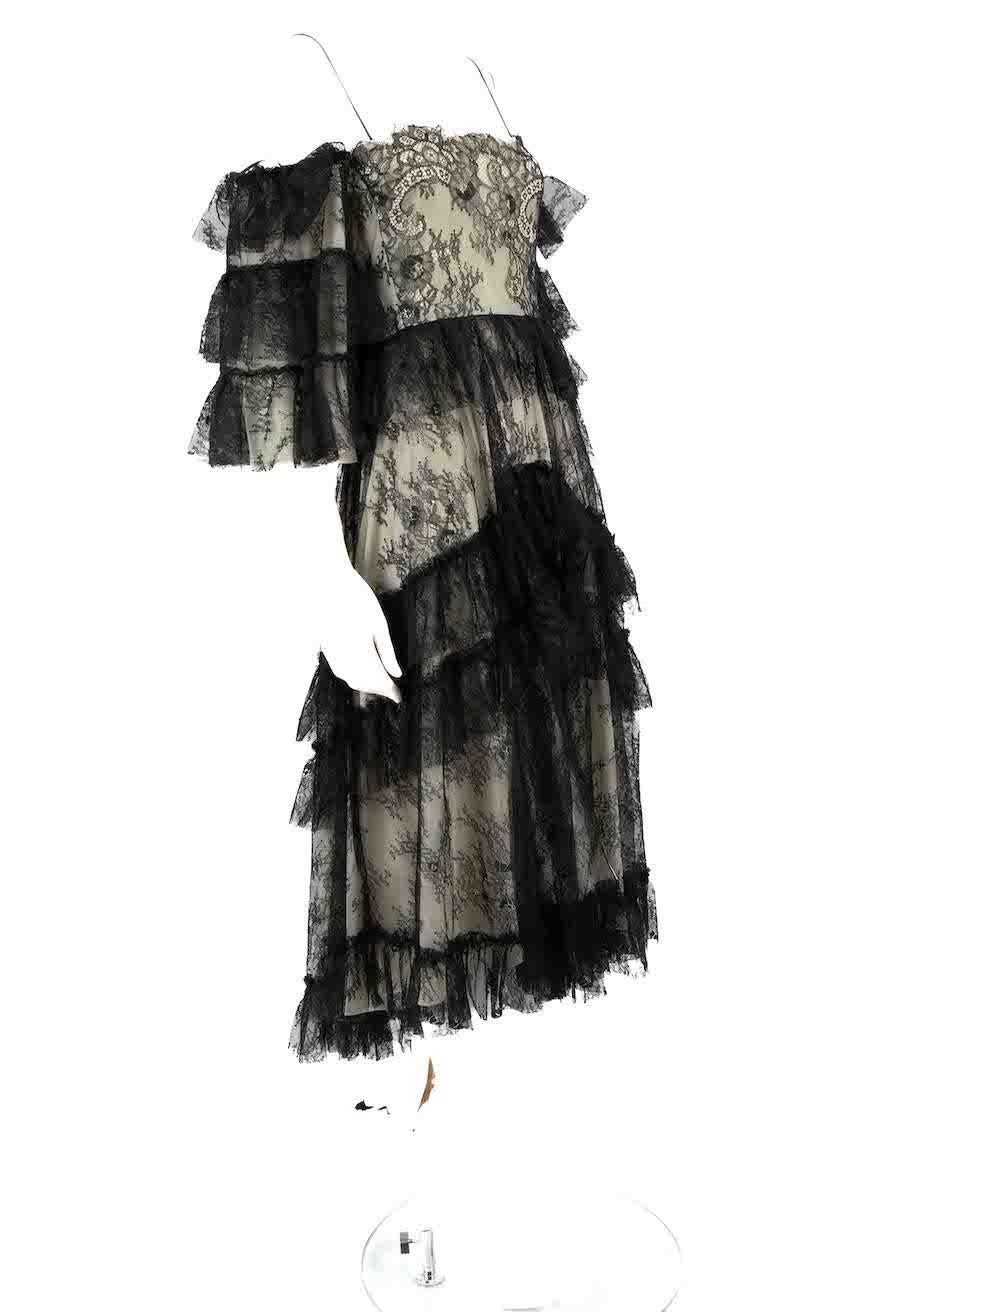 CONDITION is Never worn. No visible wear to dress is evident on this new Alexa Chung designer resale item.
 
 
 
 Details
 
 
 Black
 
 Lace
 
 Dress
 
 Floral
 
 Off the shoulder
 
 Midi
 
 Ruffled
 
 Back zip and hook fastening
 
 
 
 
 
 Made in